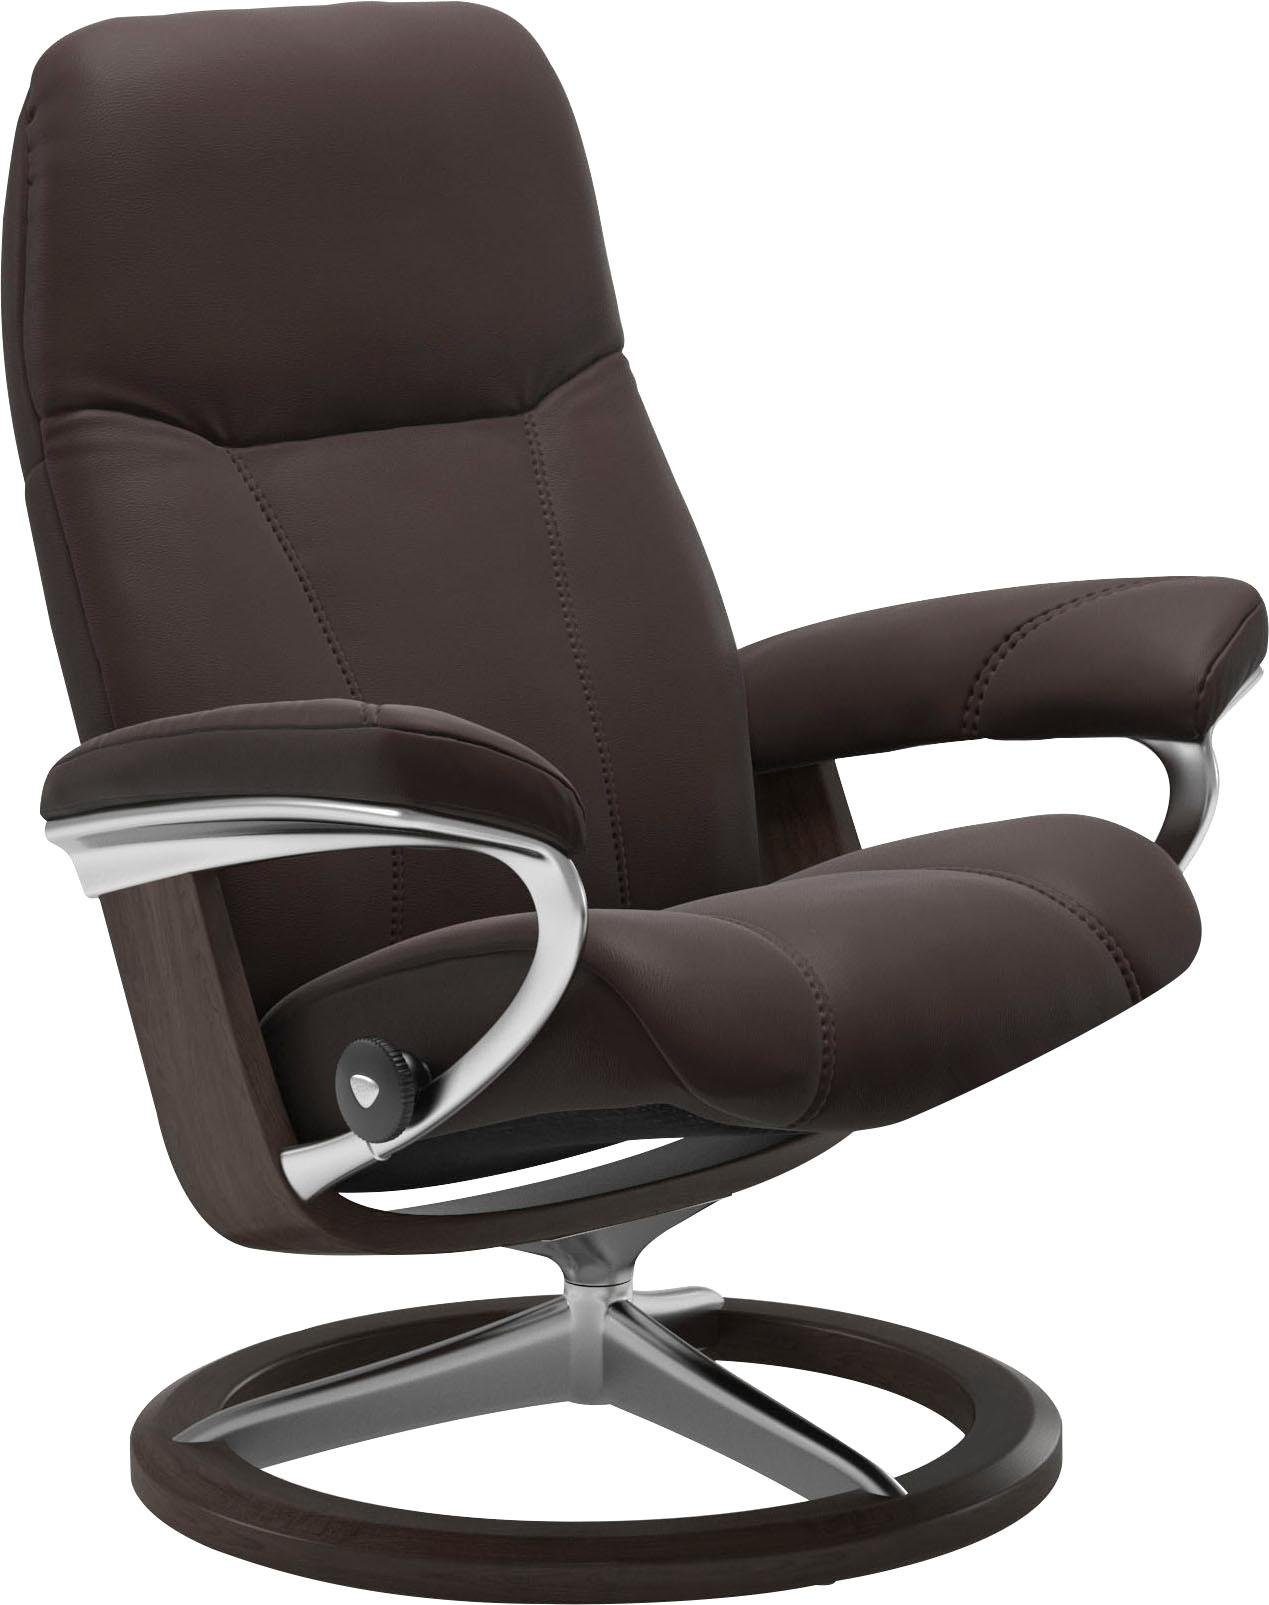 Base, S, Gestell Größe mit Consul, Stressless® Signature Wenge Relaxsessel